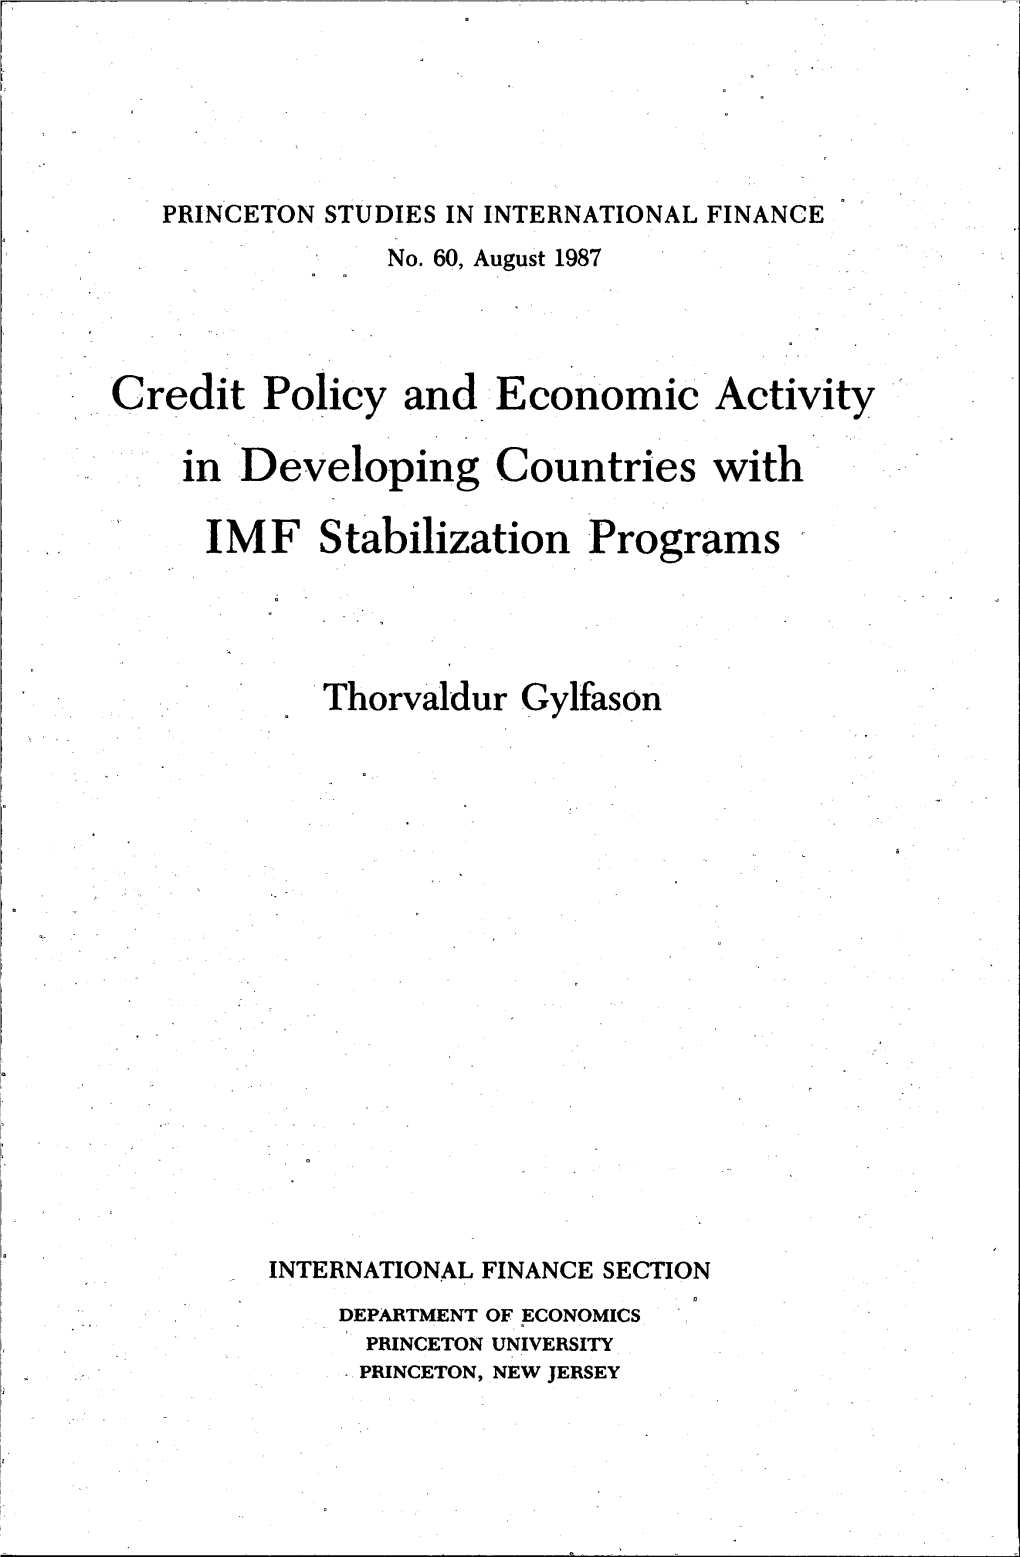 Credit Policy and Economic Activity in Developing Countries with IMF Stabilization Programs